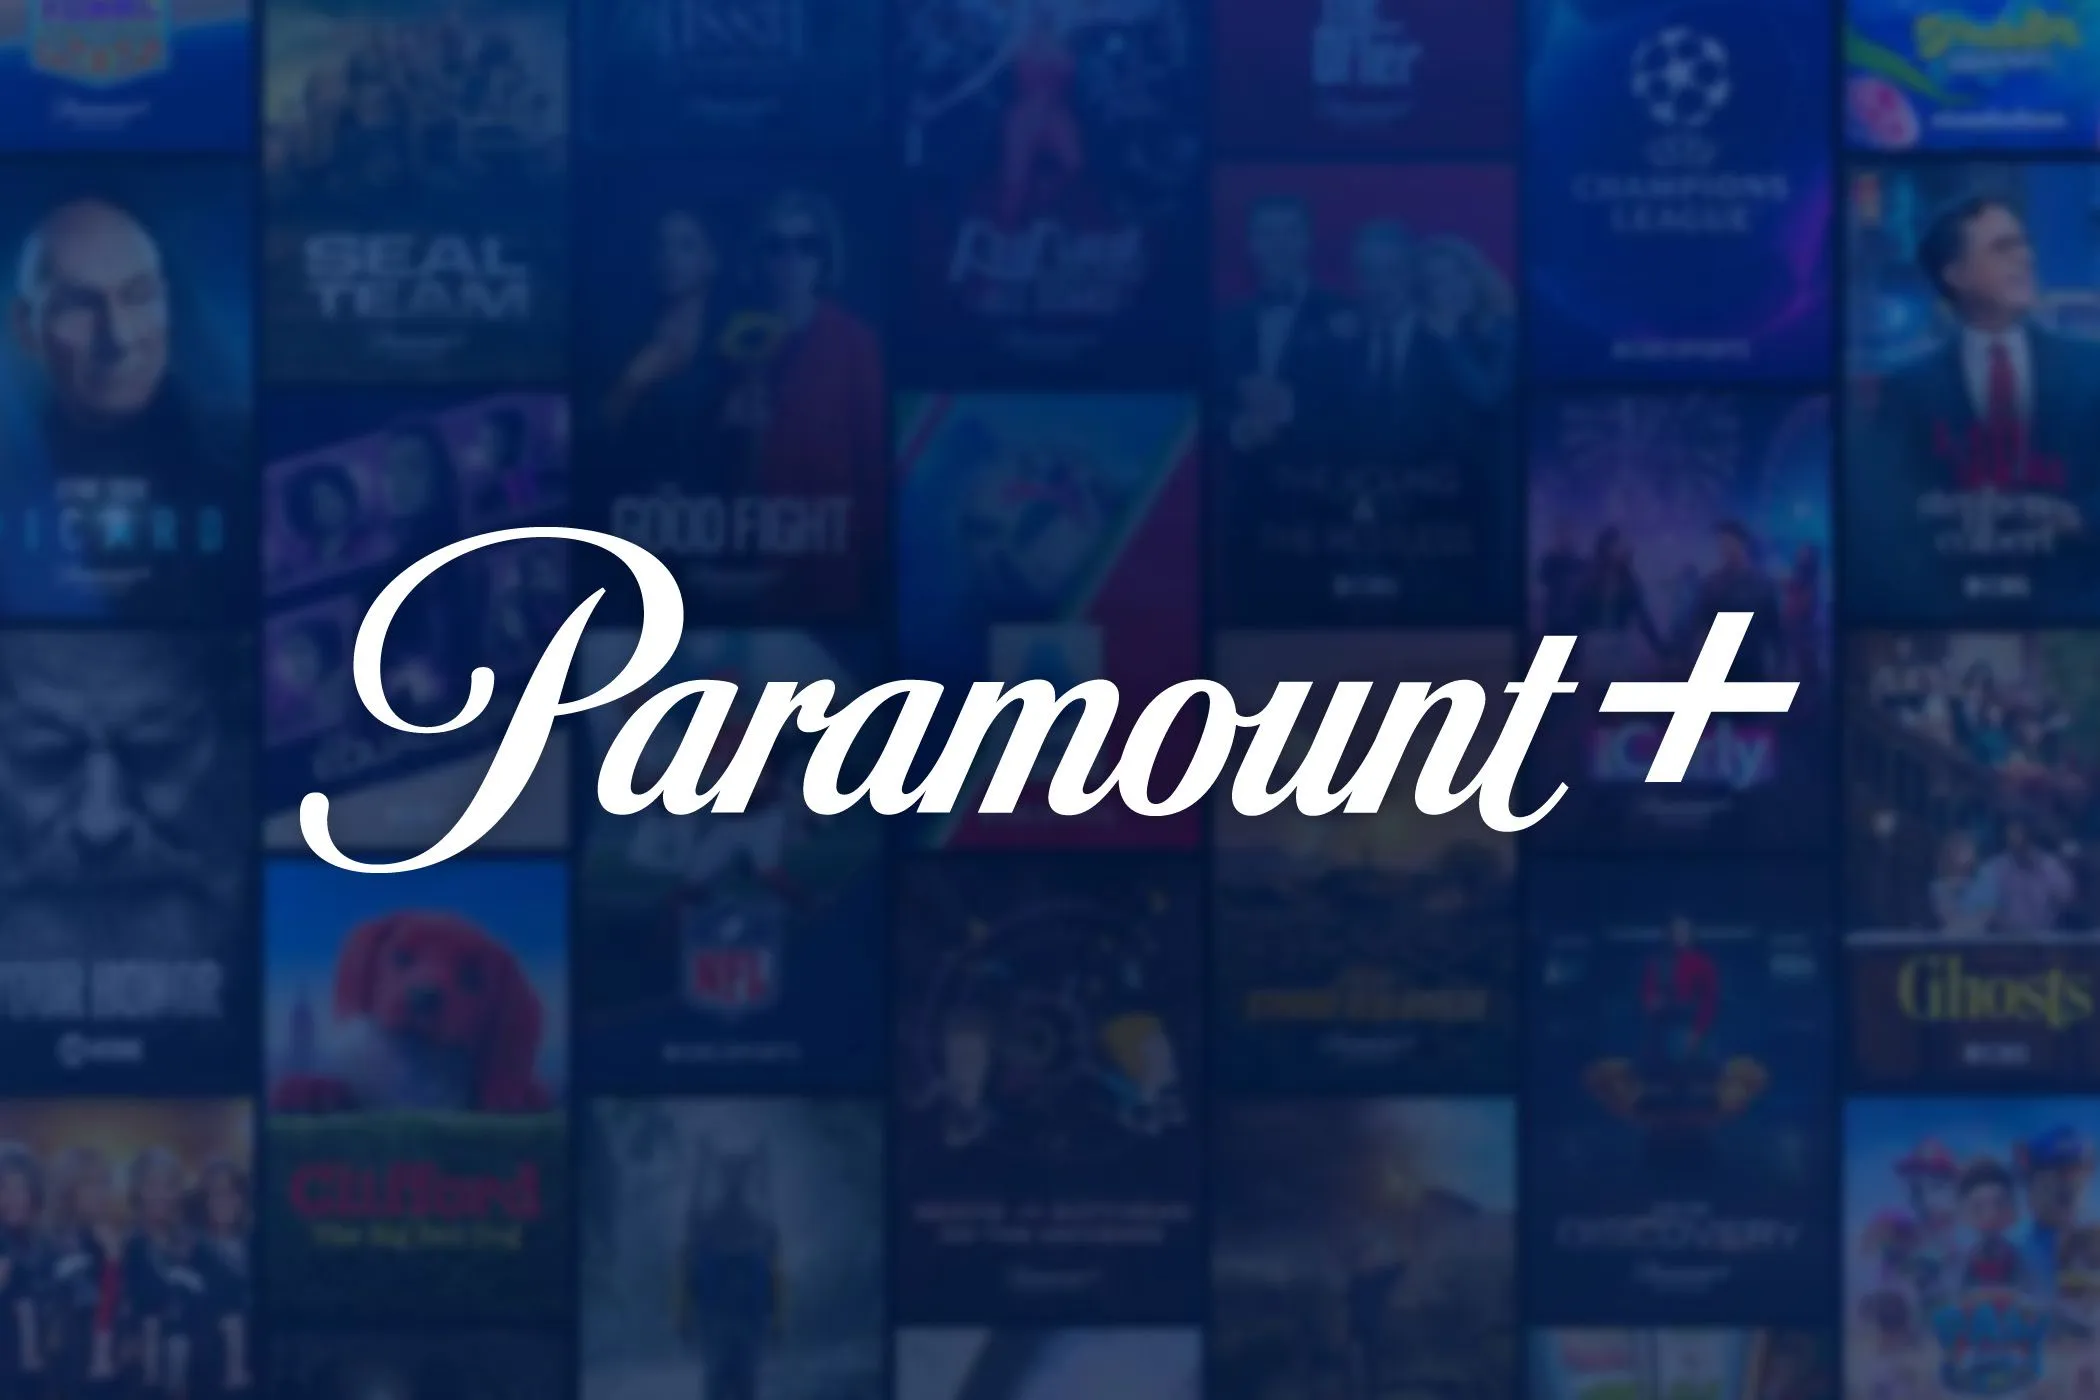 Paramount+ Plans Big Changes How New Partnerships Could Shape the Future of Streaming---